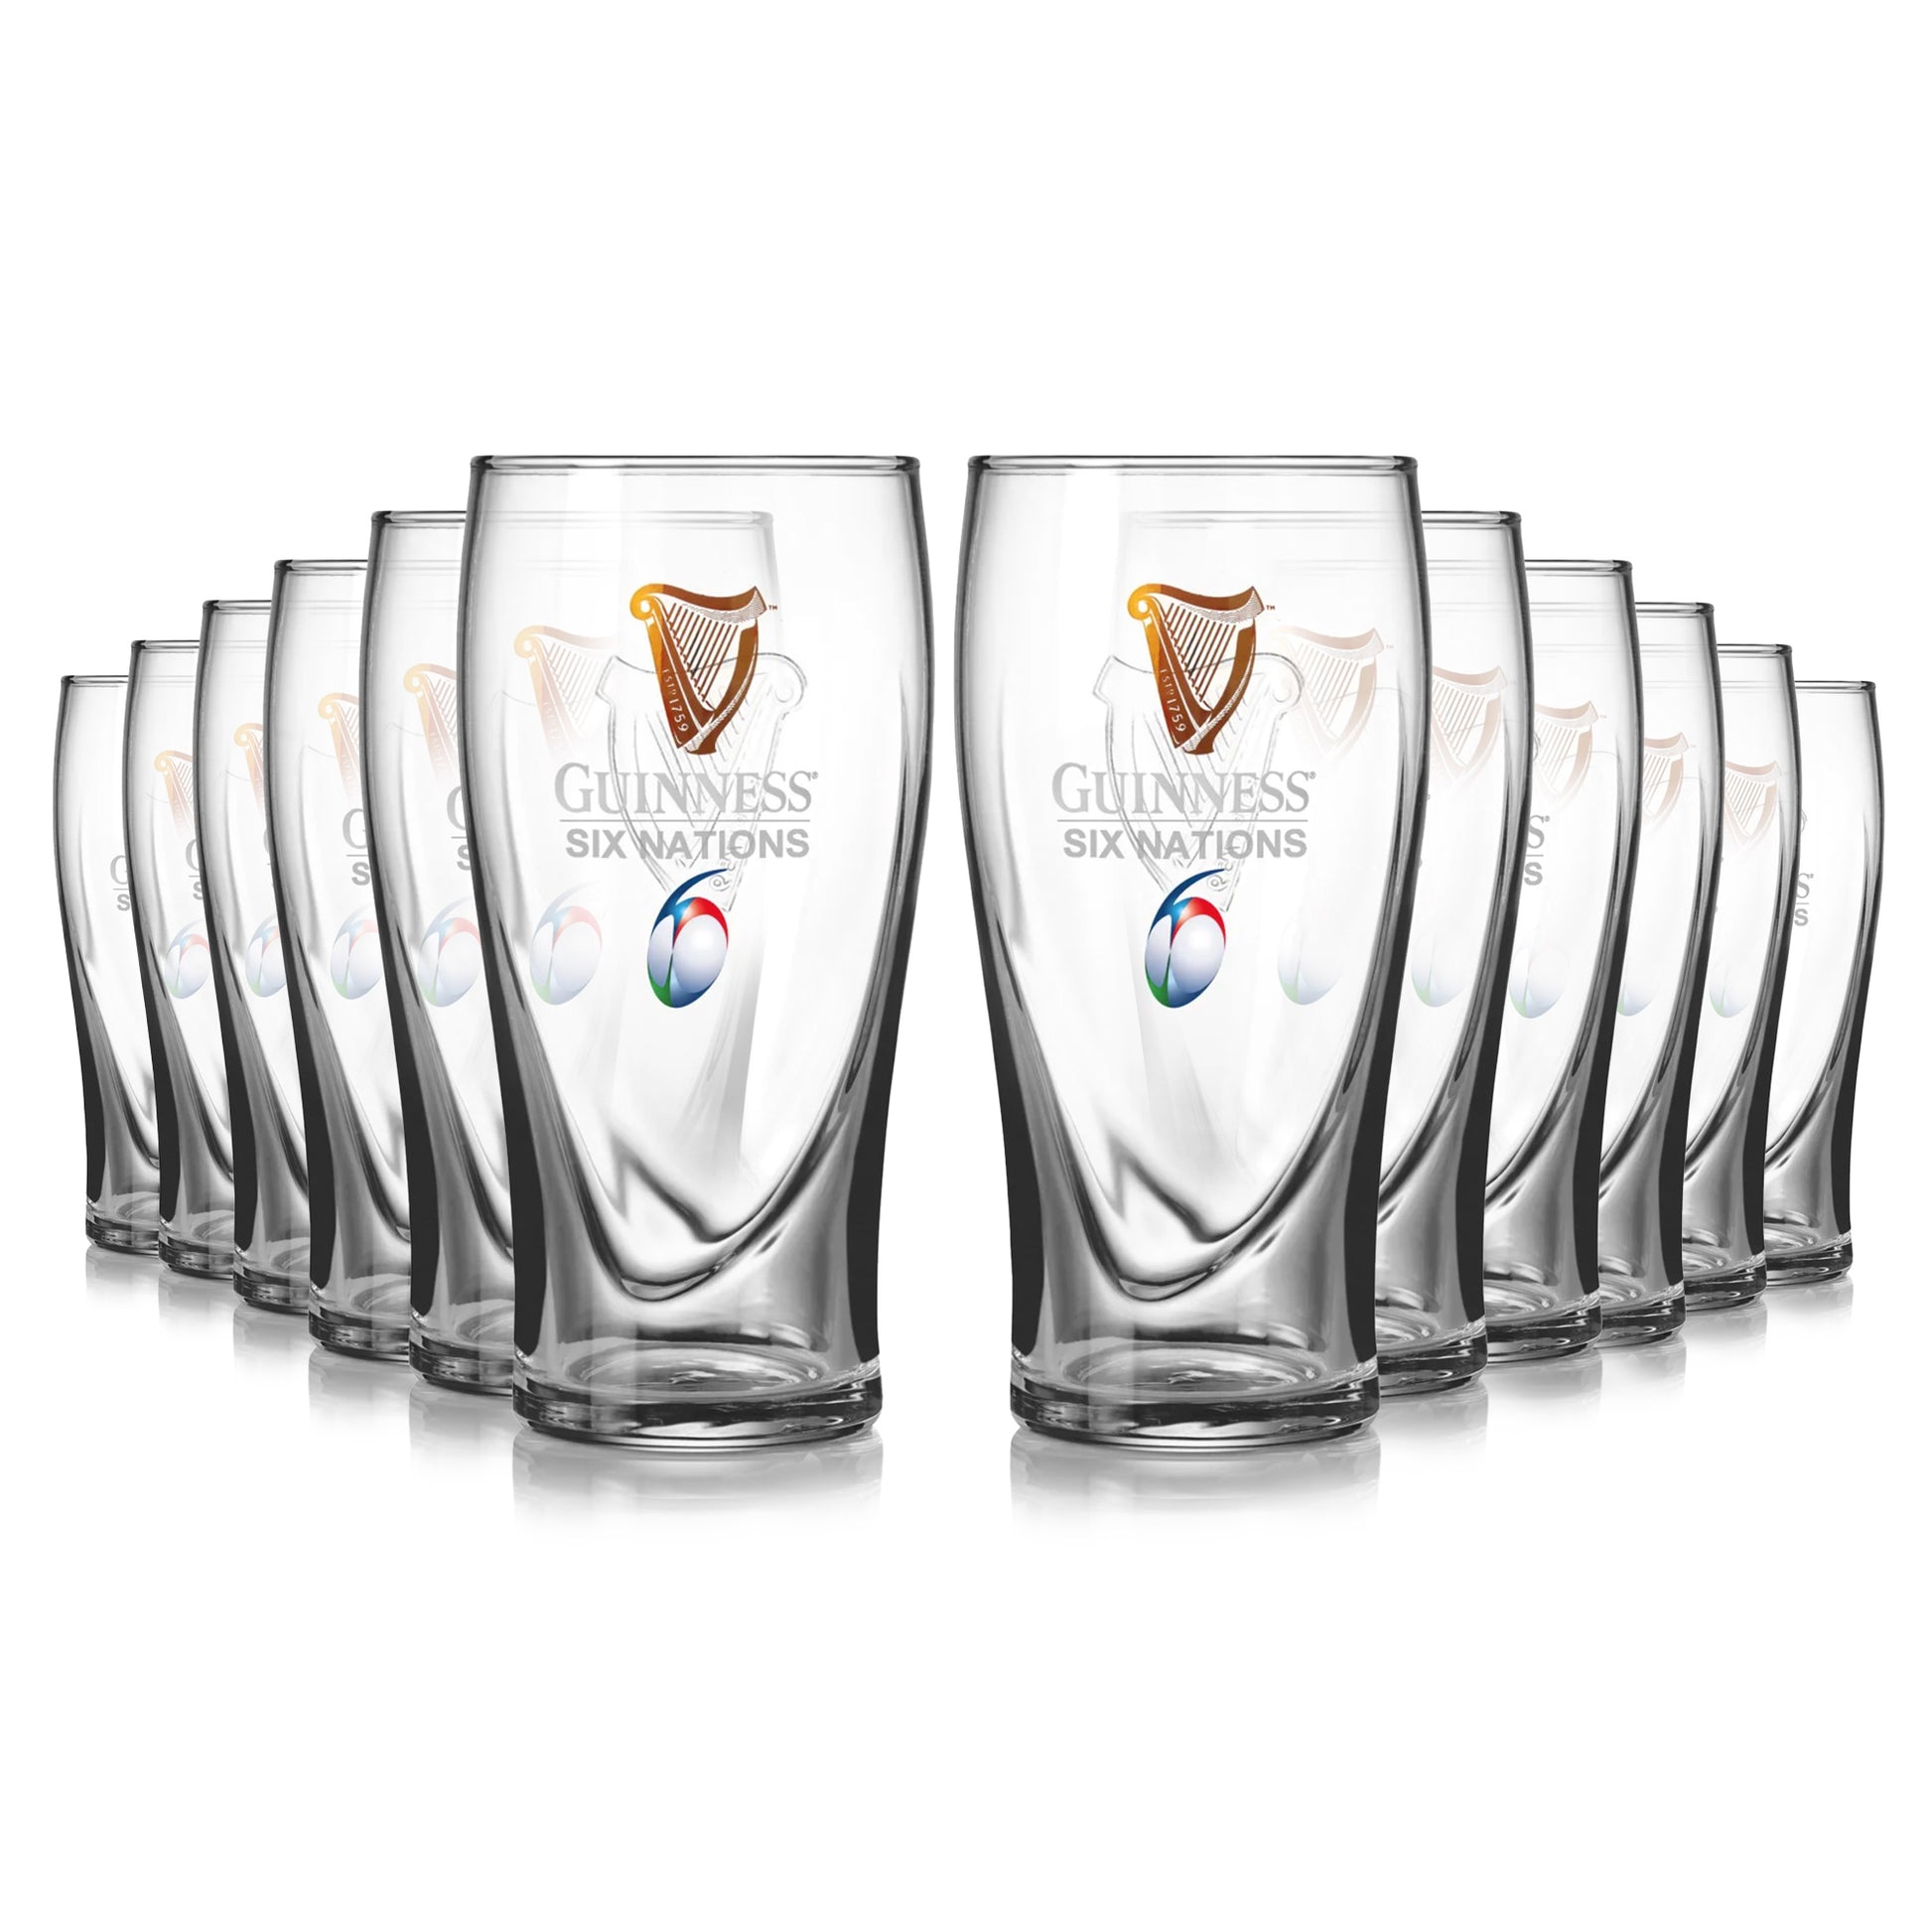 Eight Guinness UK Six Nations Pint Glasses on a white background.